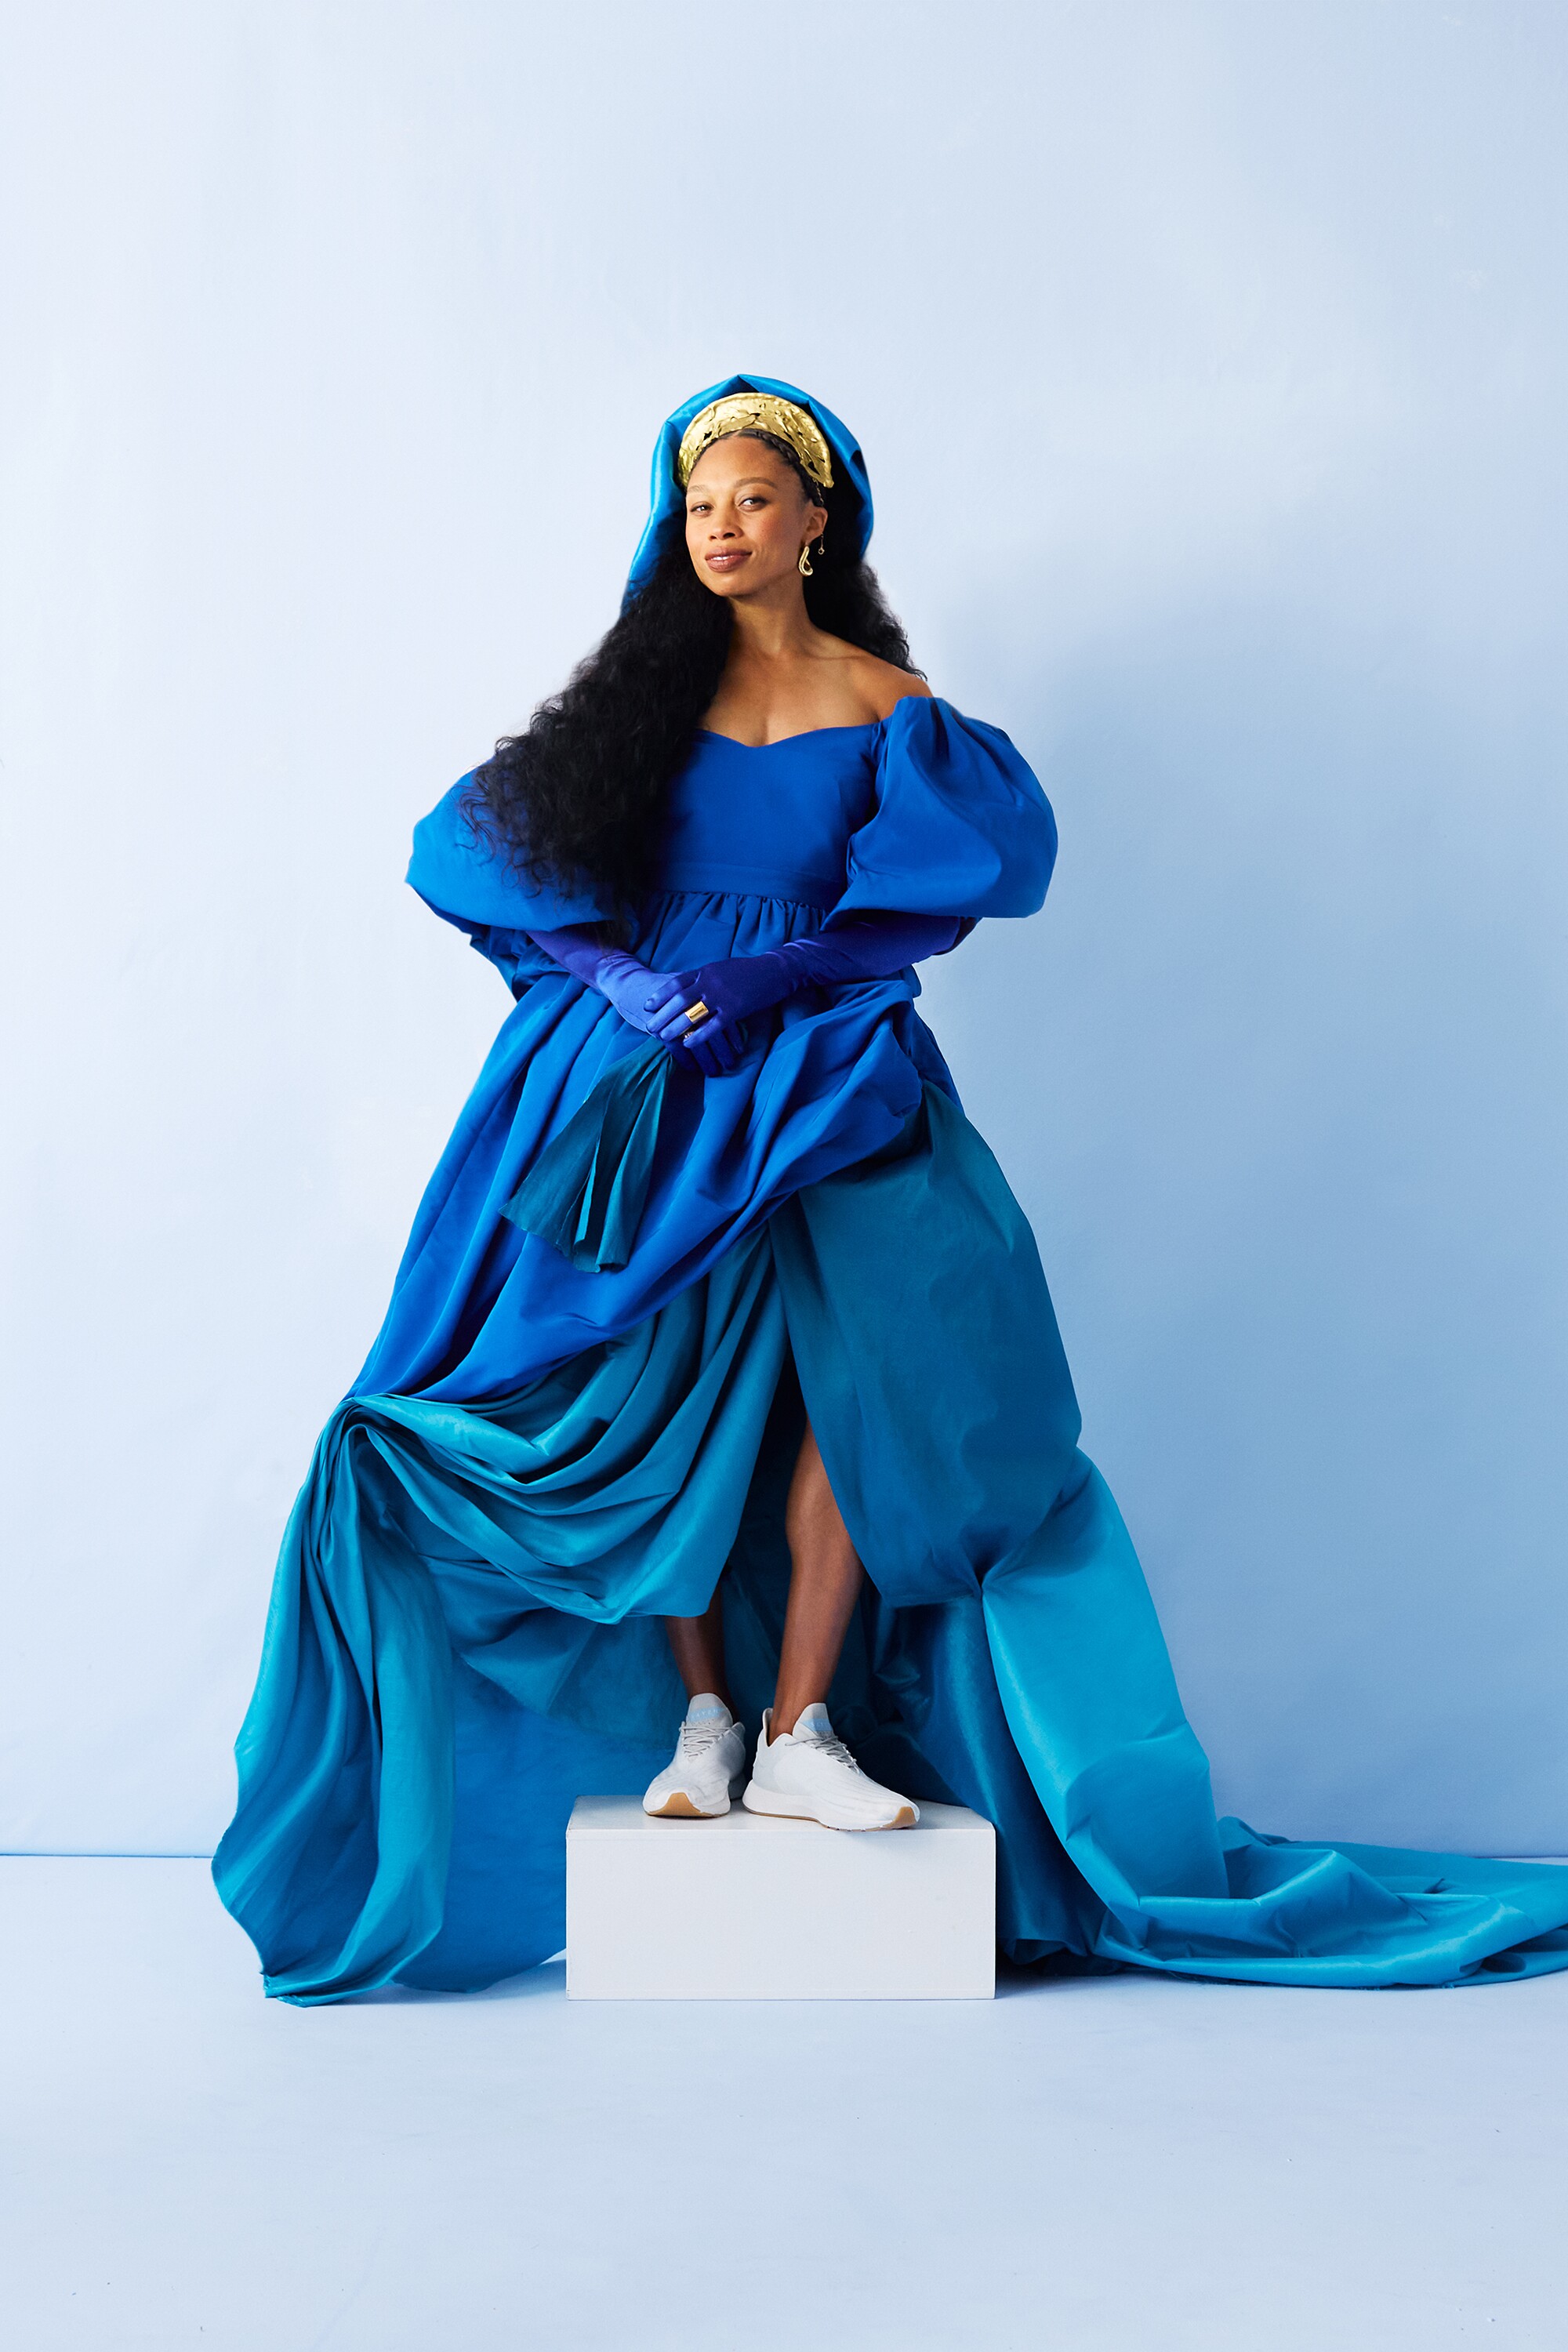 Allyson Felix in a voluminous blue dress with puffed sleeves and a blue headpiece wearing her white Saysh sneakers.